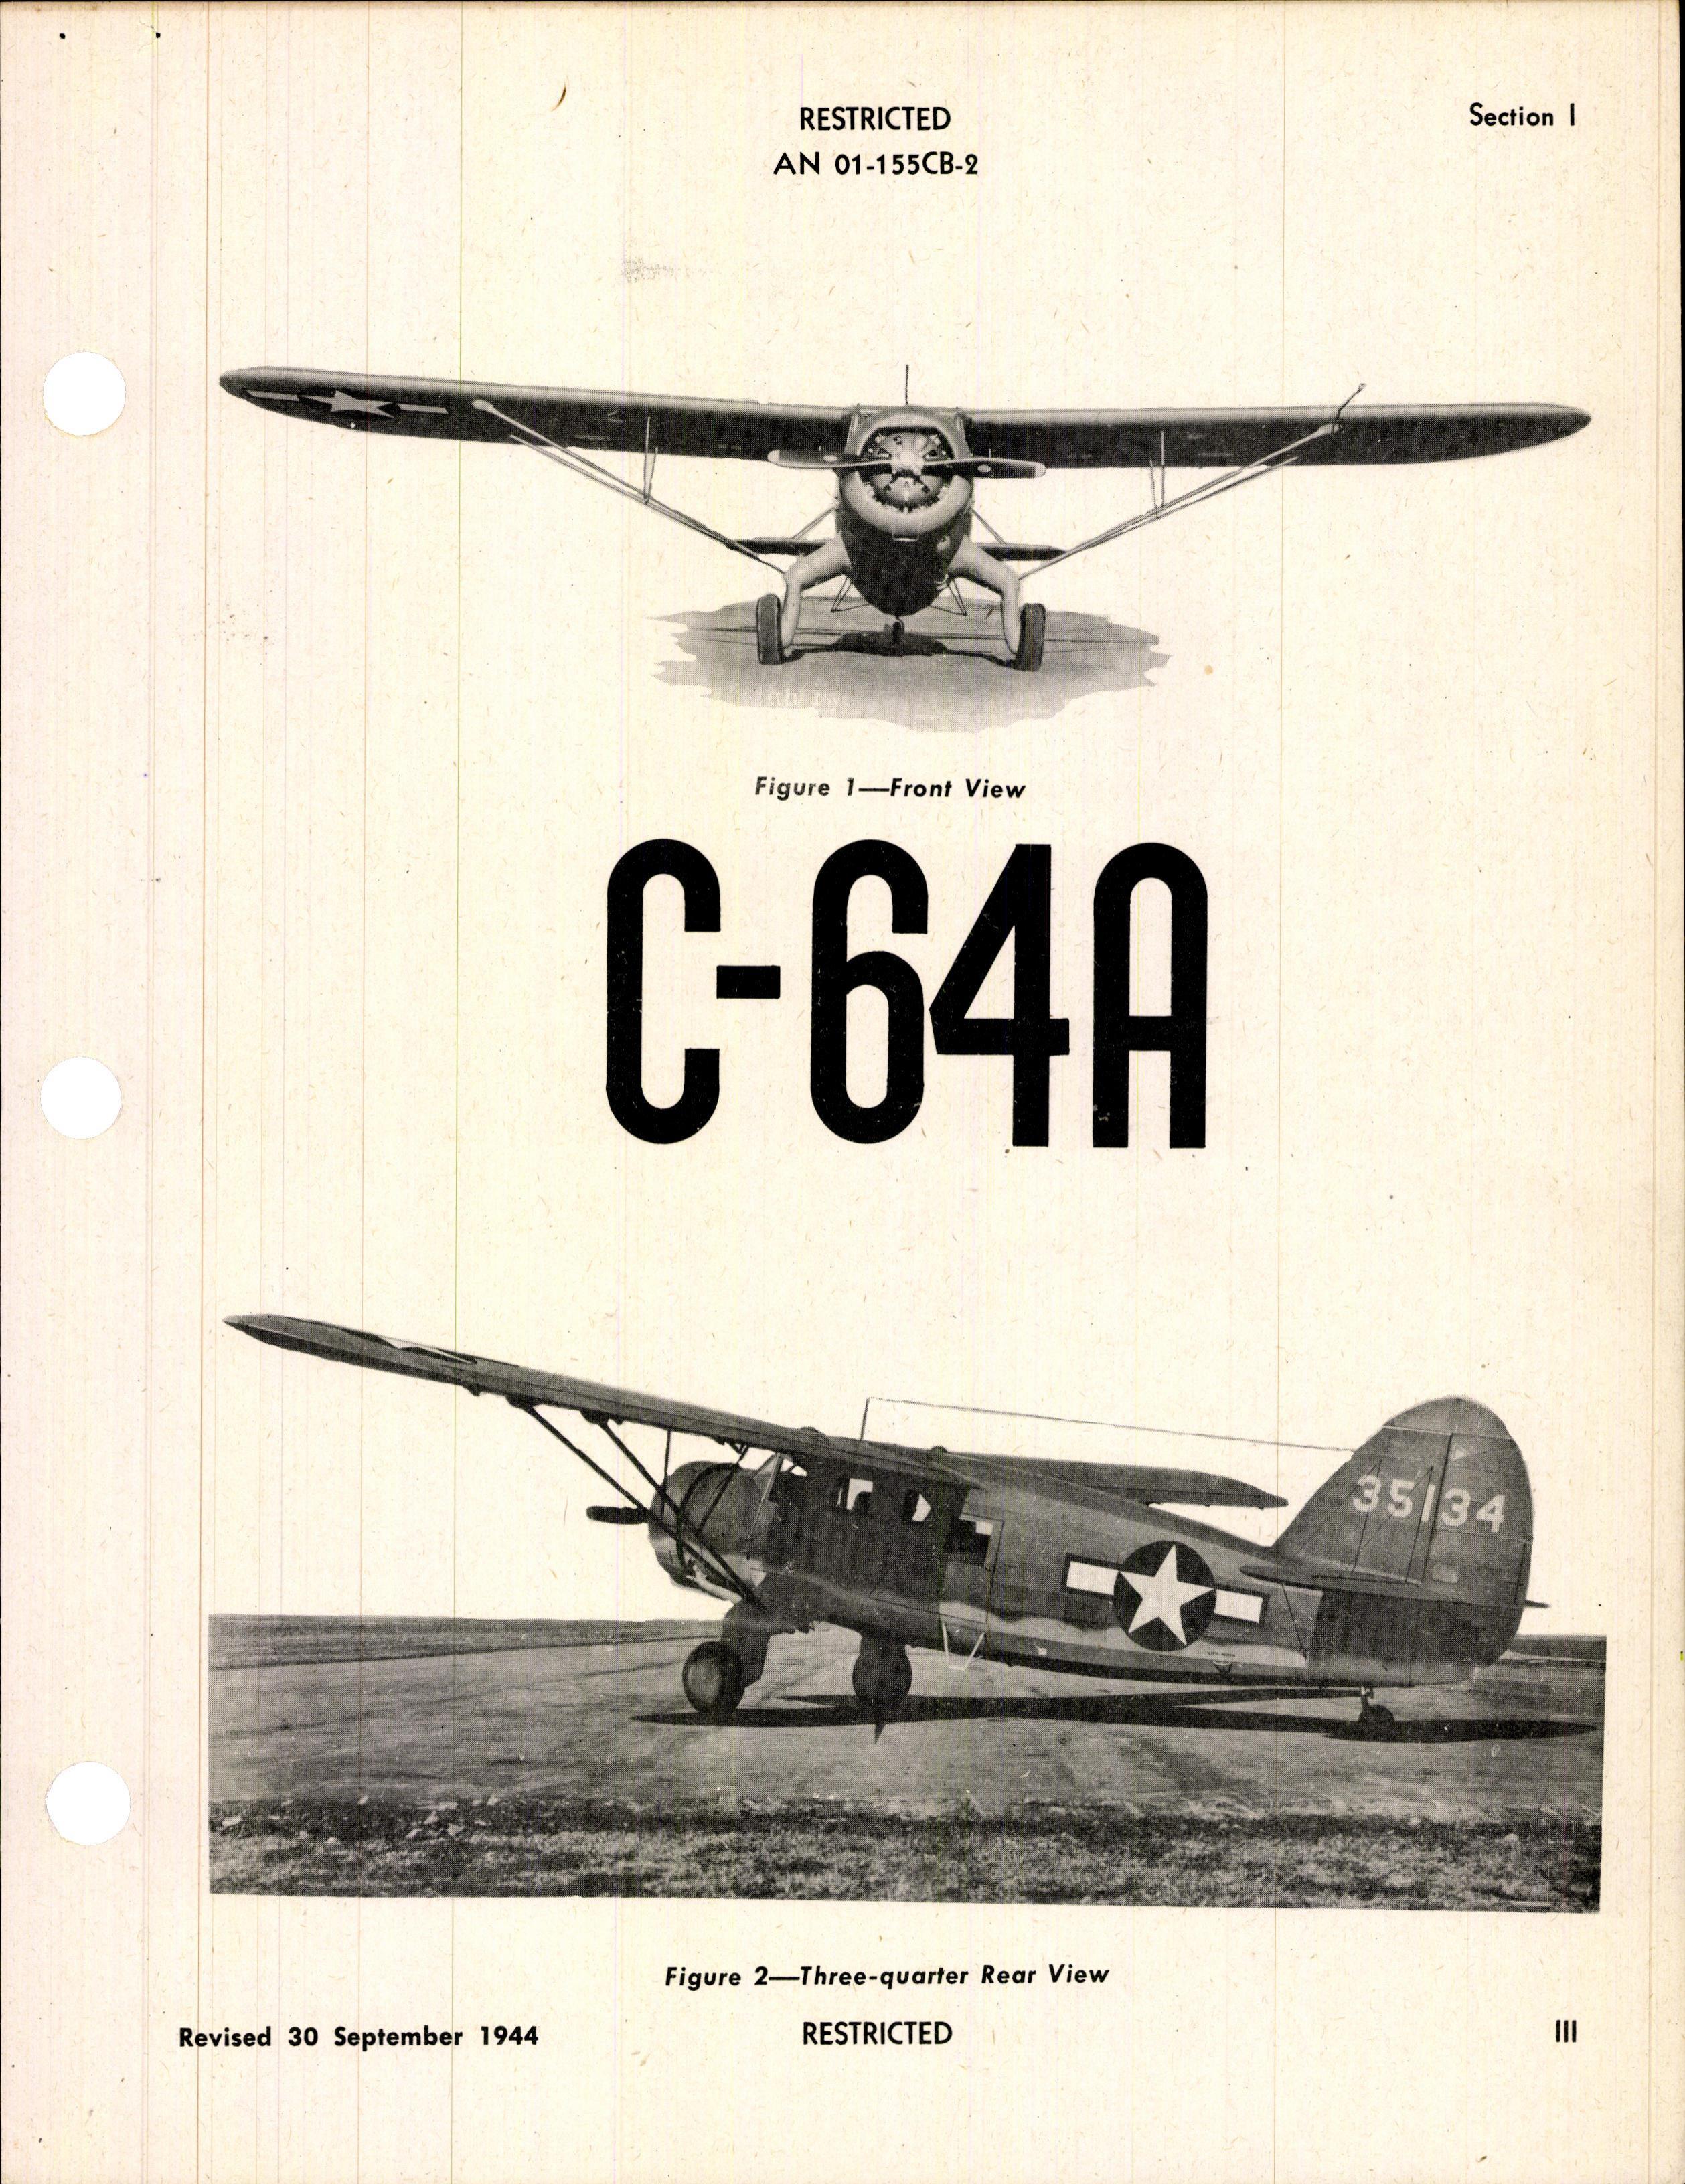 Sample page 3 from AirCorps Library document: Erection and Maintenance Instructions for C-64A